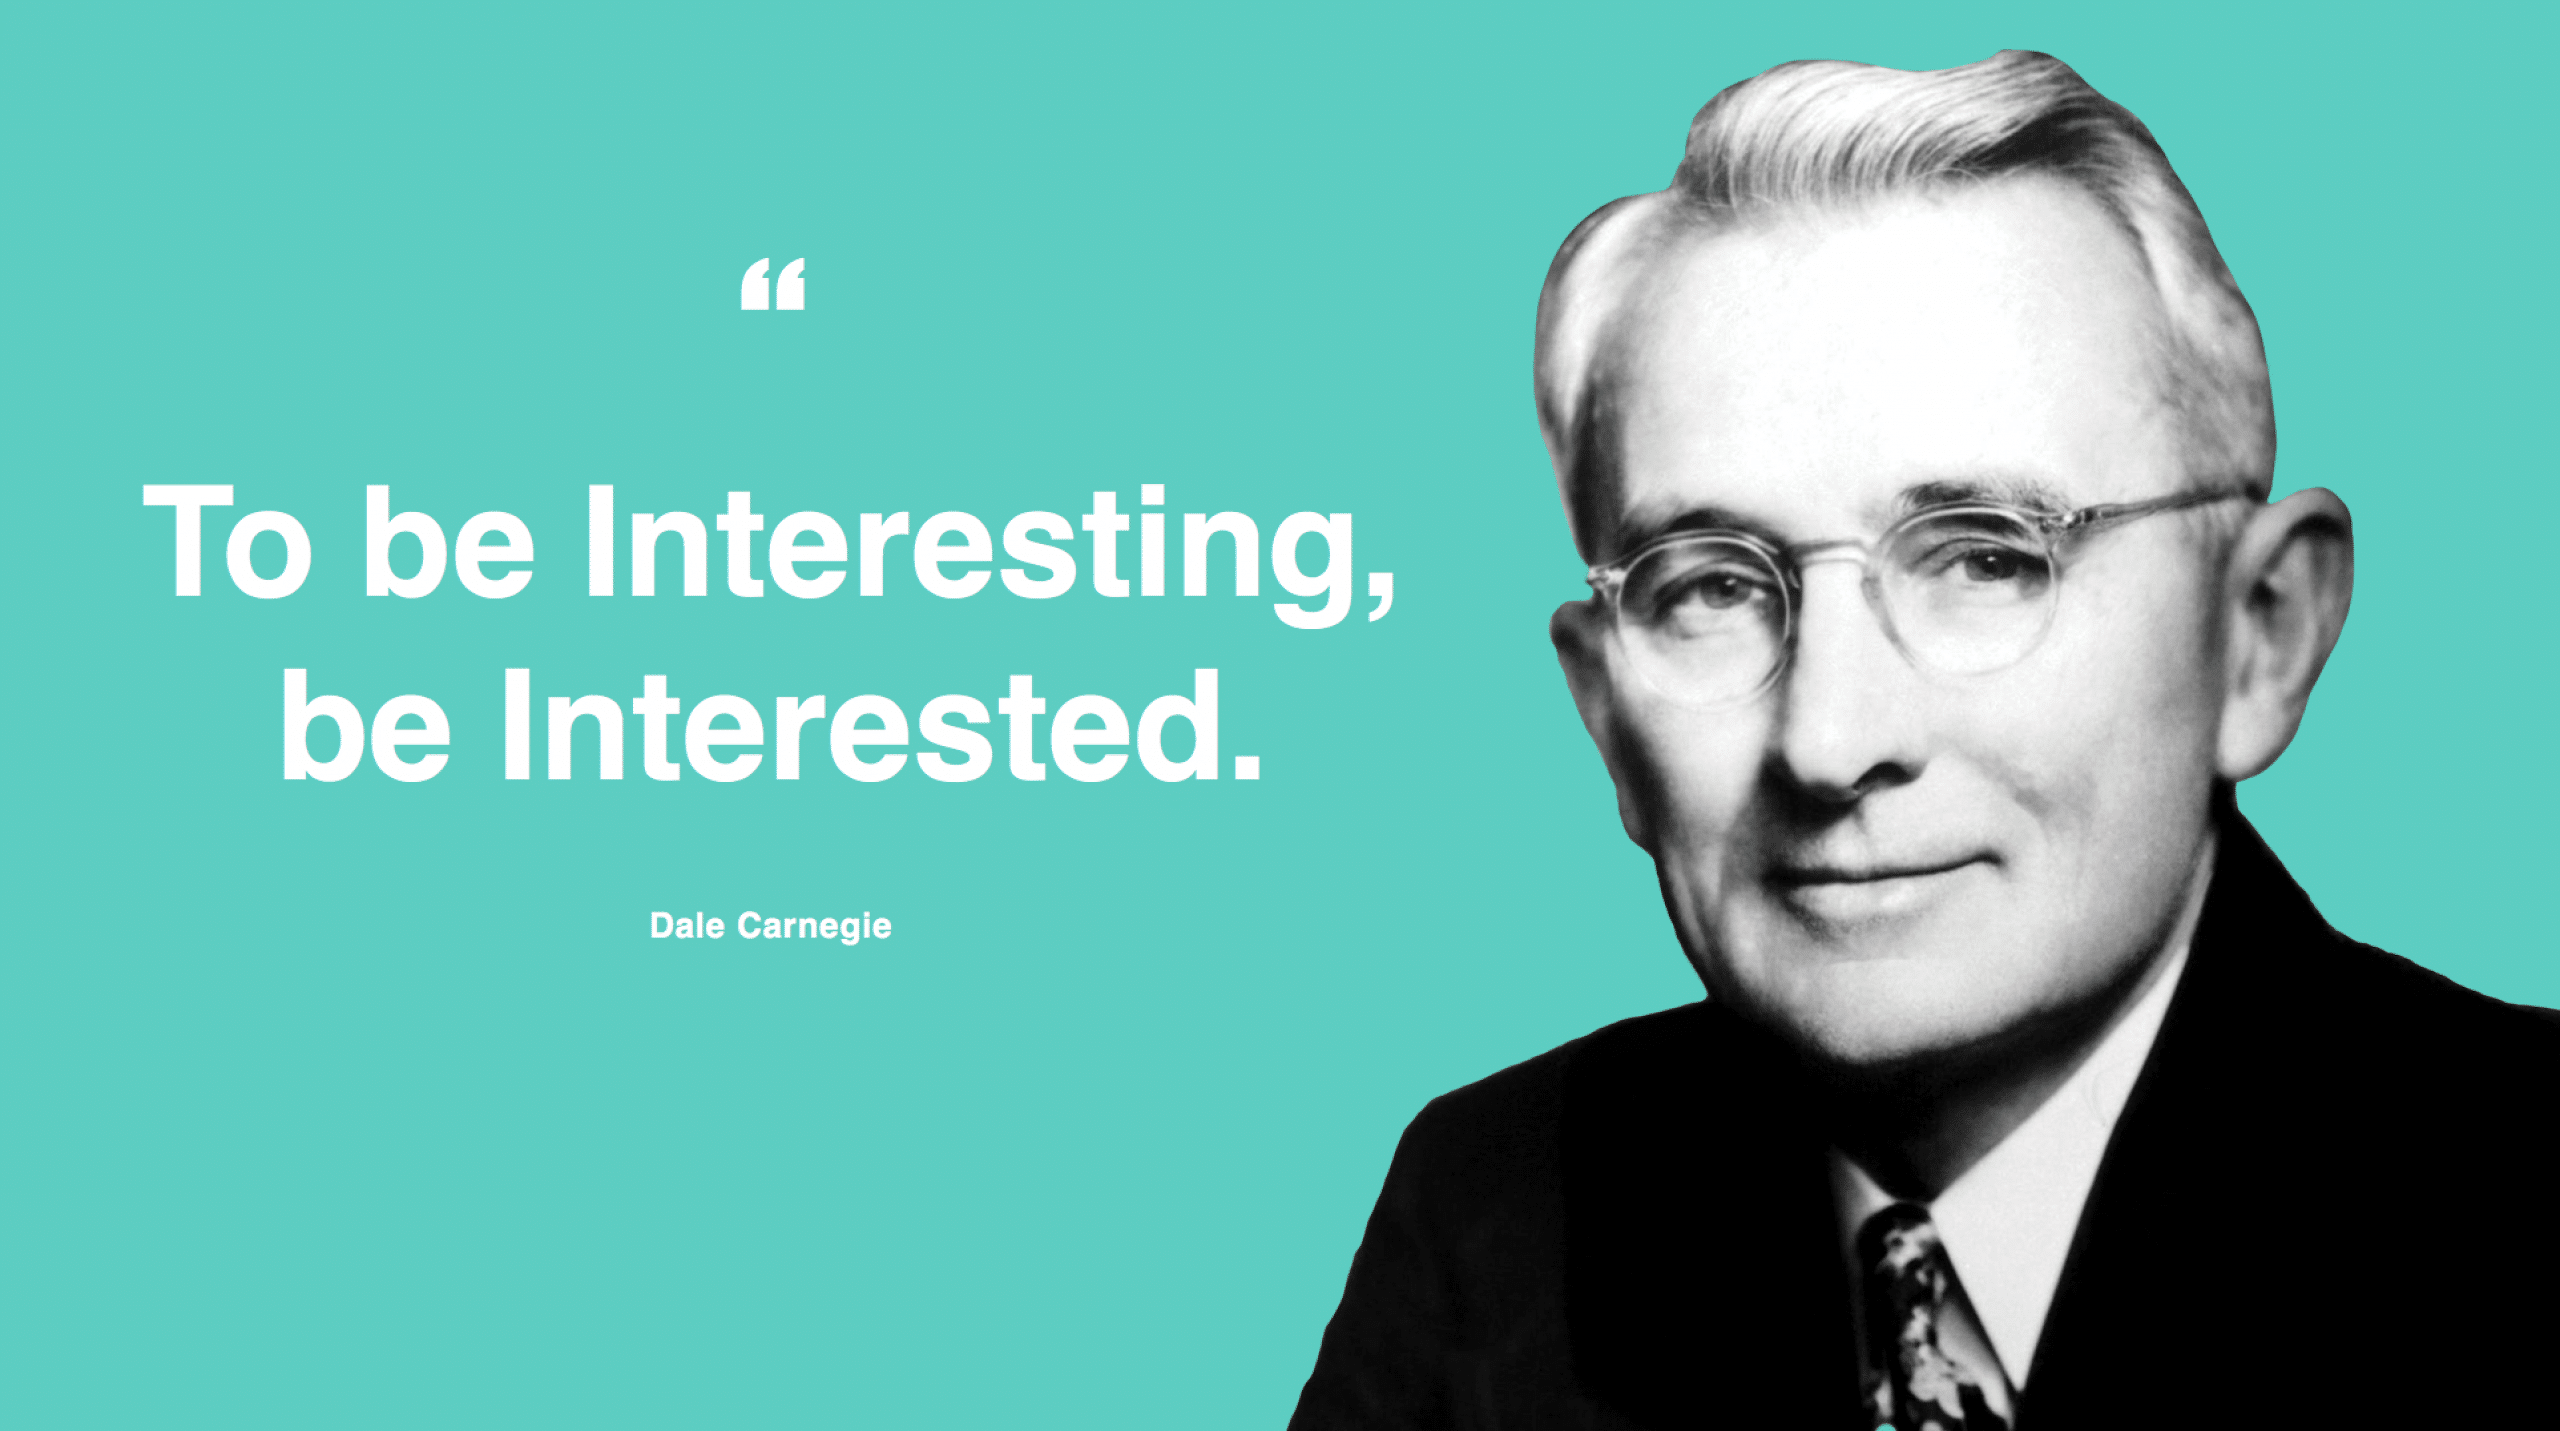 "To be interesting, be interested." - Dale Carnegie